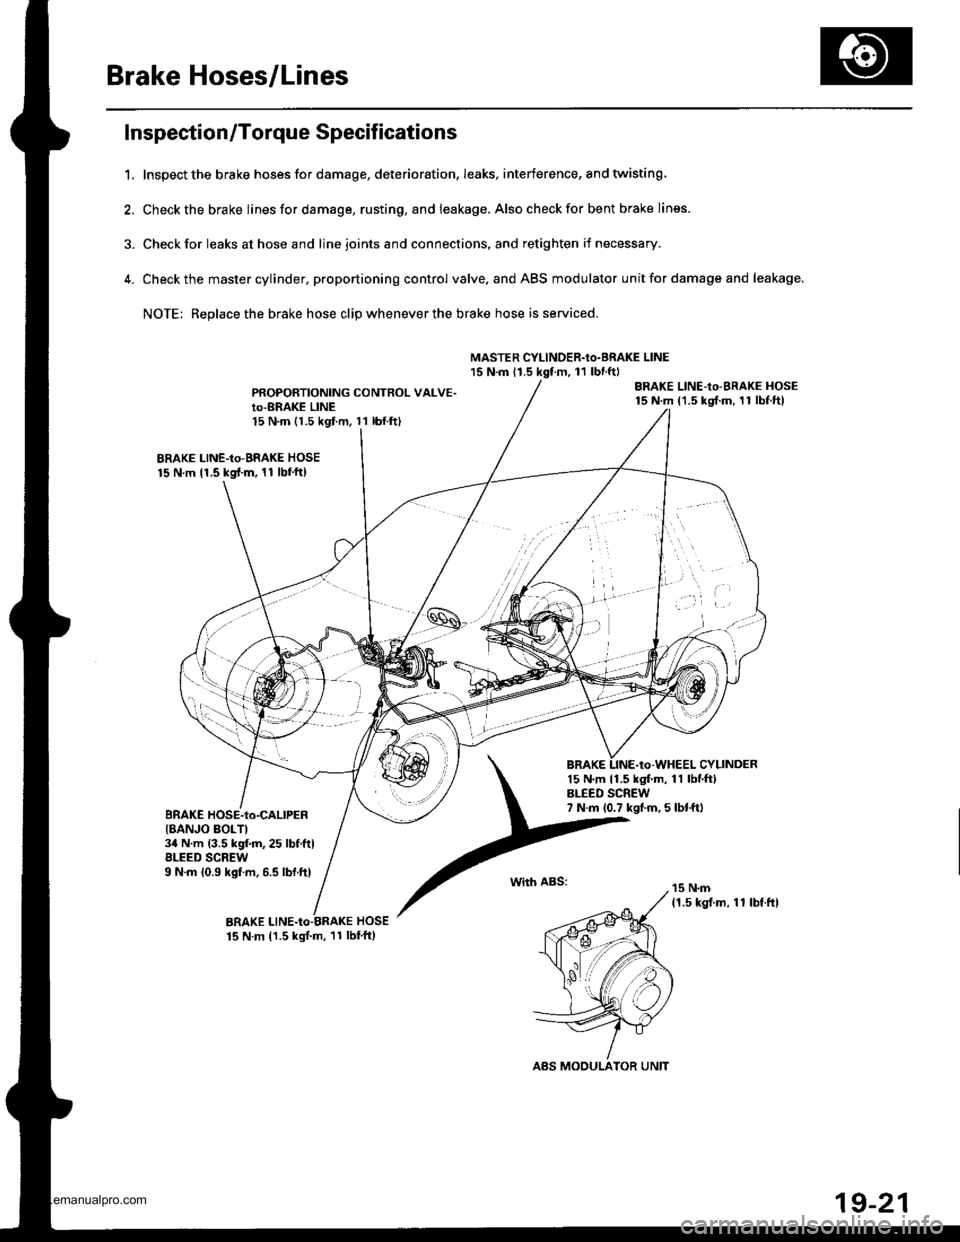 HONDA CR-V 1998 RD1-RD3 / 1.G Workshop Manual 
Brake Hoses/Lines
Inspection/Torque Specif ications
1. Inspect the brake hoses for damage, deterioration, leaks, interference, and twisting
2. Check the brake Iines for damage, rusting, and leakage. 